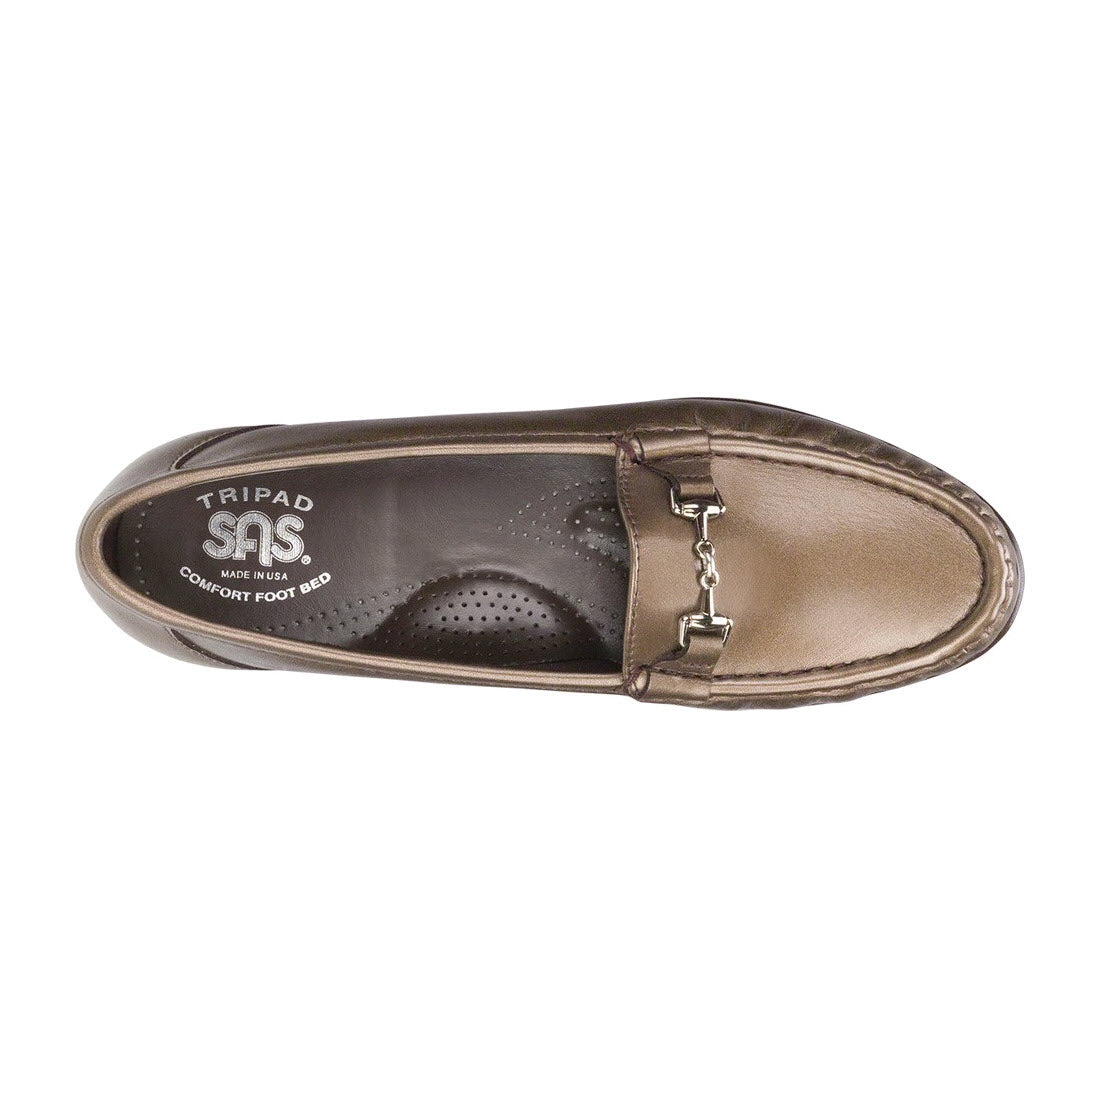 A single brown leather loafer with a metal embellishment on top, showcasing a comfortable SAS® Tripad® Cushion insole labeled &quot;tripad SAS comfort foot pad. - SAS METRO BRONZE - WOMENS